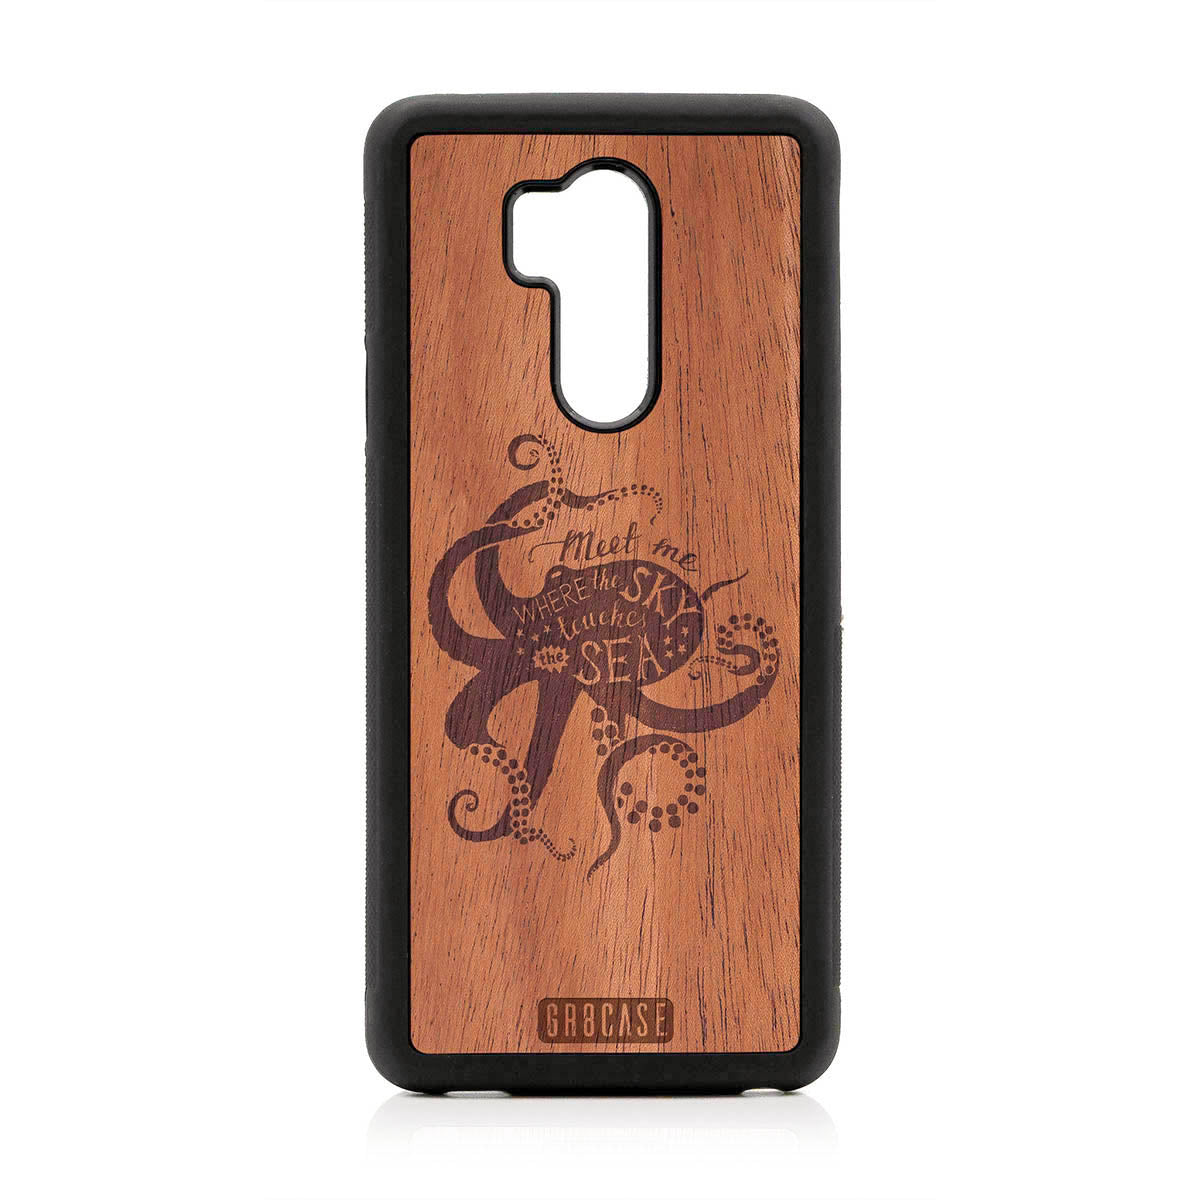 Meet Me Where The Sky Touches The Sea (Octopus) Design Wood Case For LG G7 ThinQ